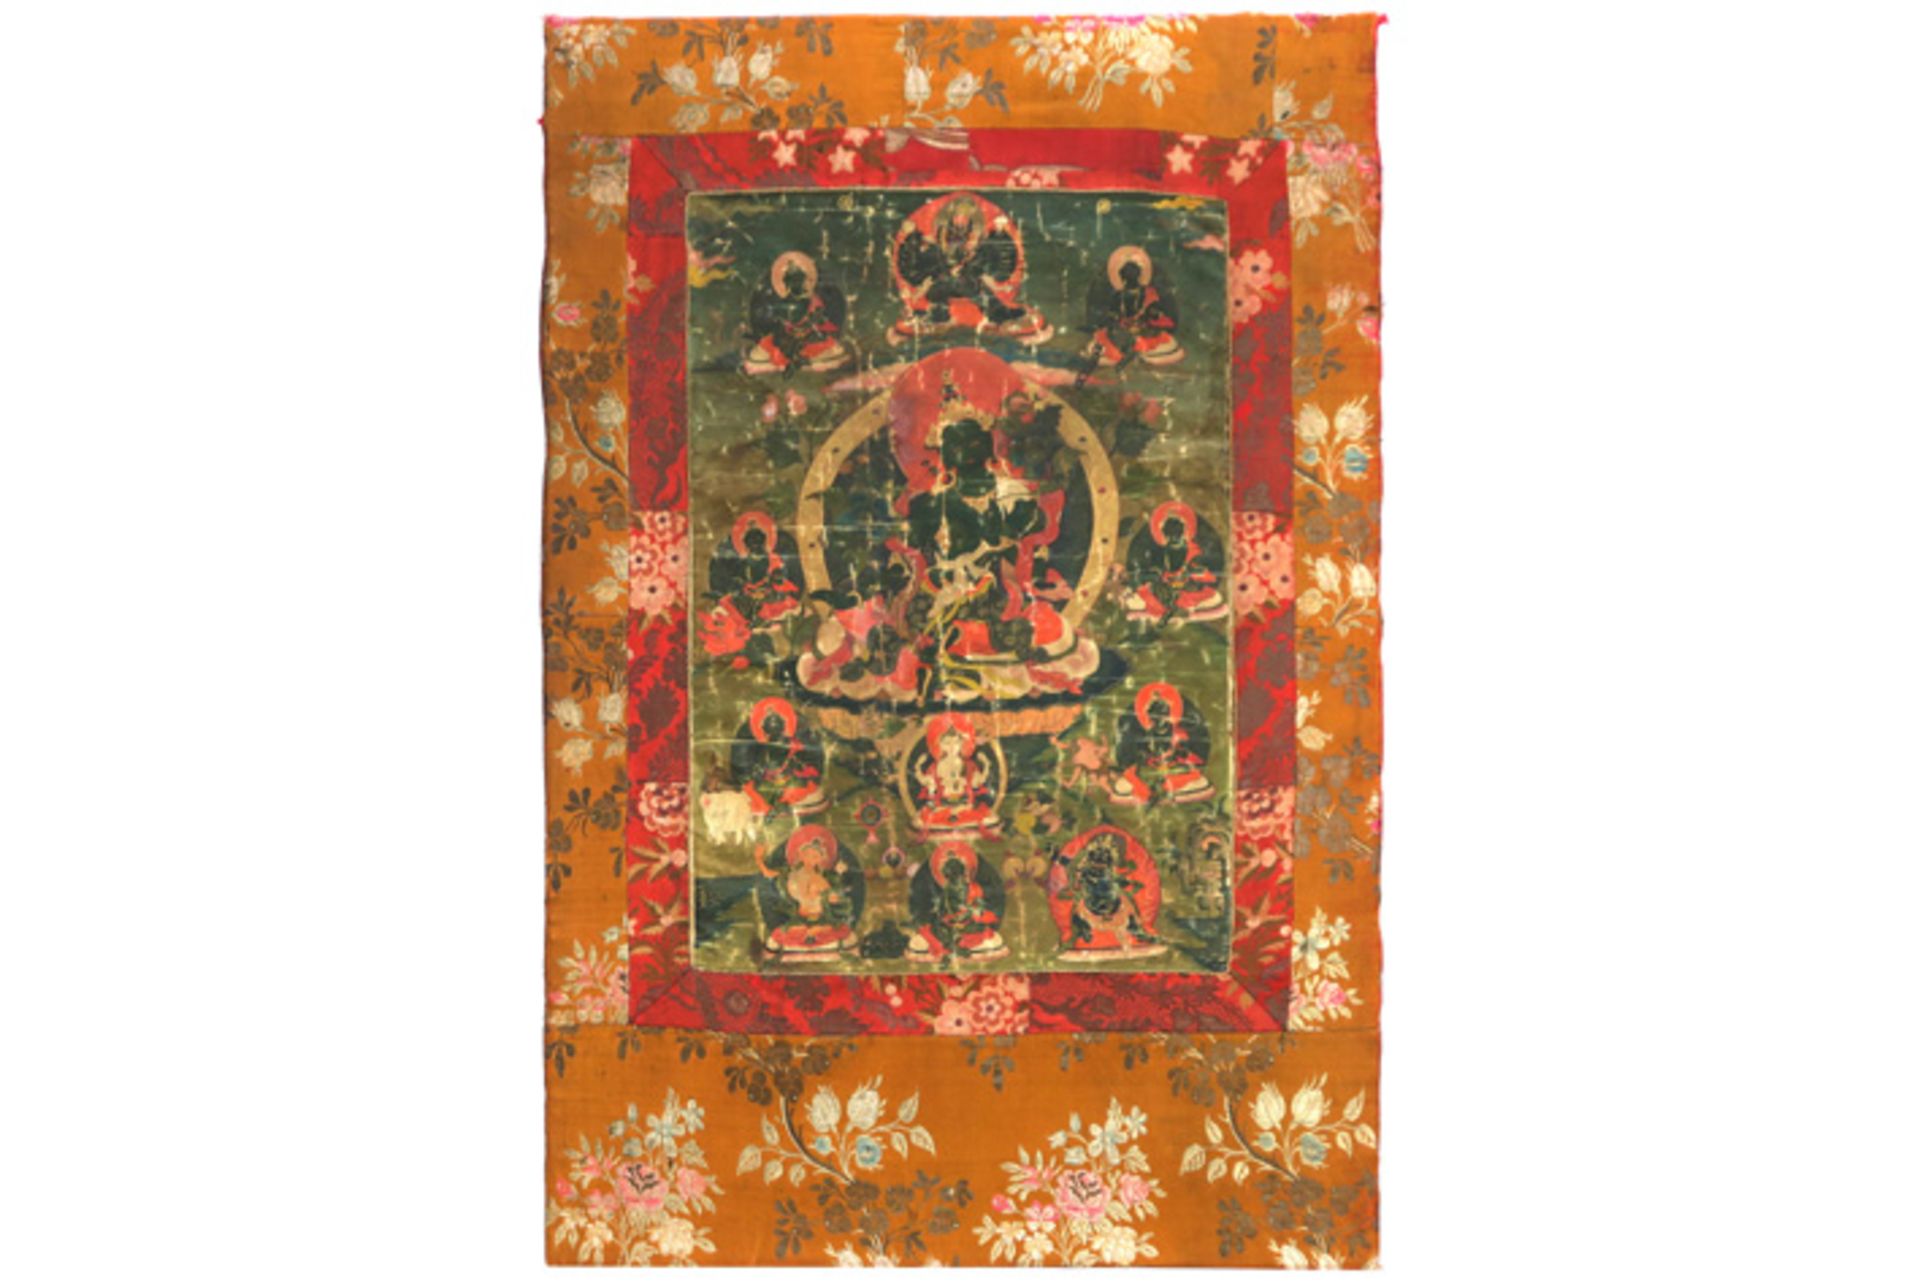 antique Tibetan tangka with the Green Tara surrounded by other buddhistic gods || Antieke